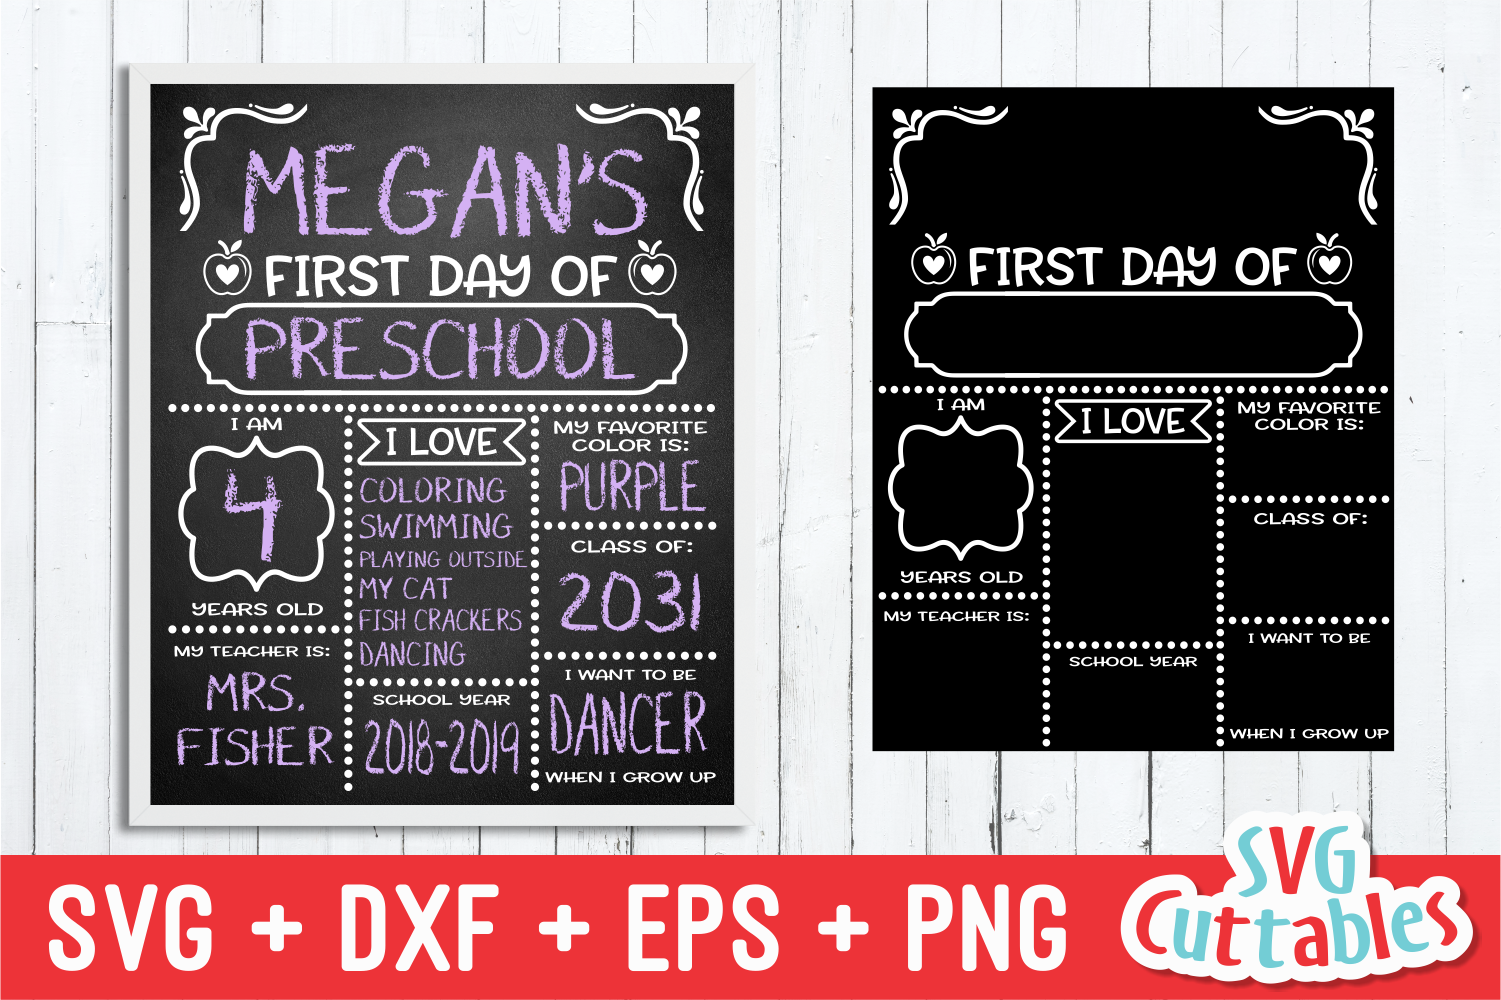 First Day Of School Apples Svg Cut File Svgcuttablefiles